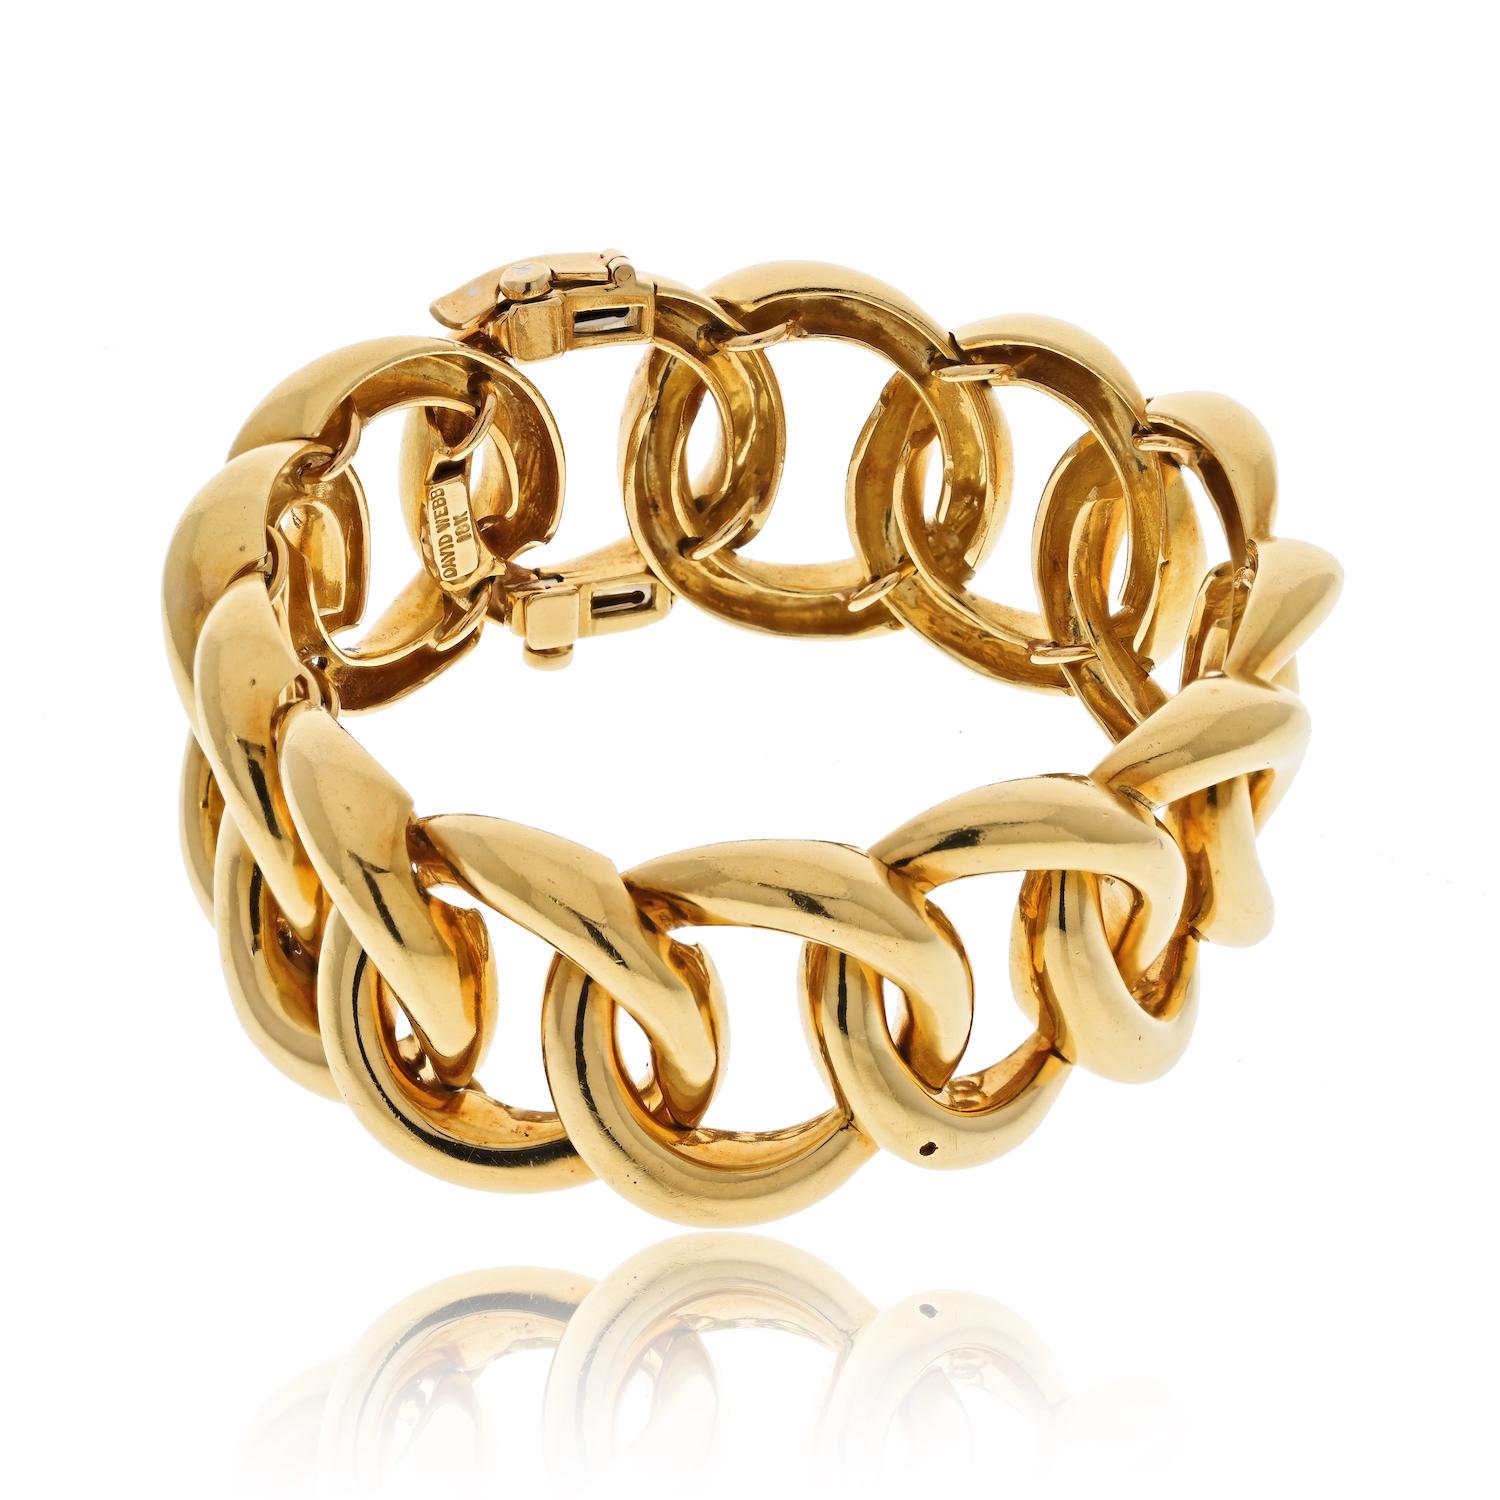 The vintage 18k yellow gold curb link bangle bracelet designed by David Webb is a true masterpiece of jewelry. With a wrist size of 6.5 inches and a width of 23mm, this bracelet is a statement piece that will capture the attention of any admirer of